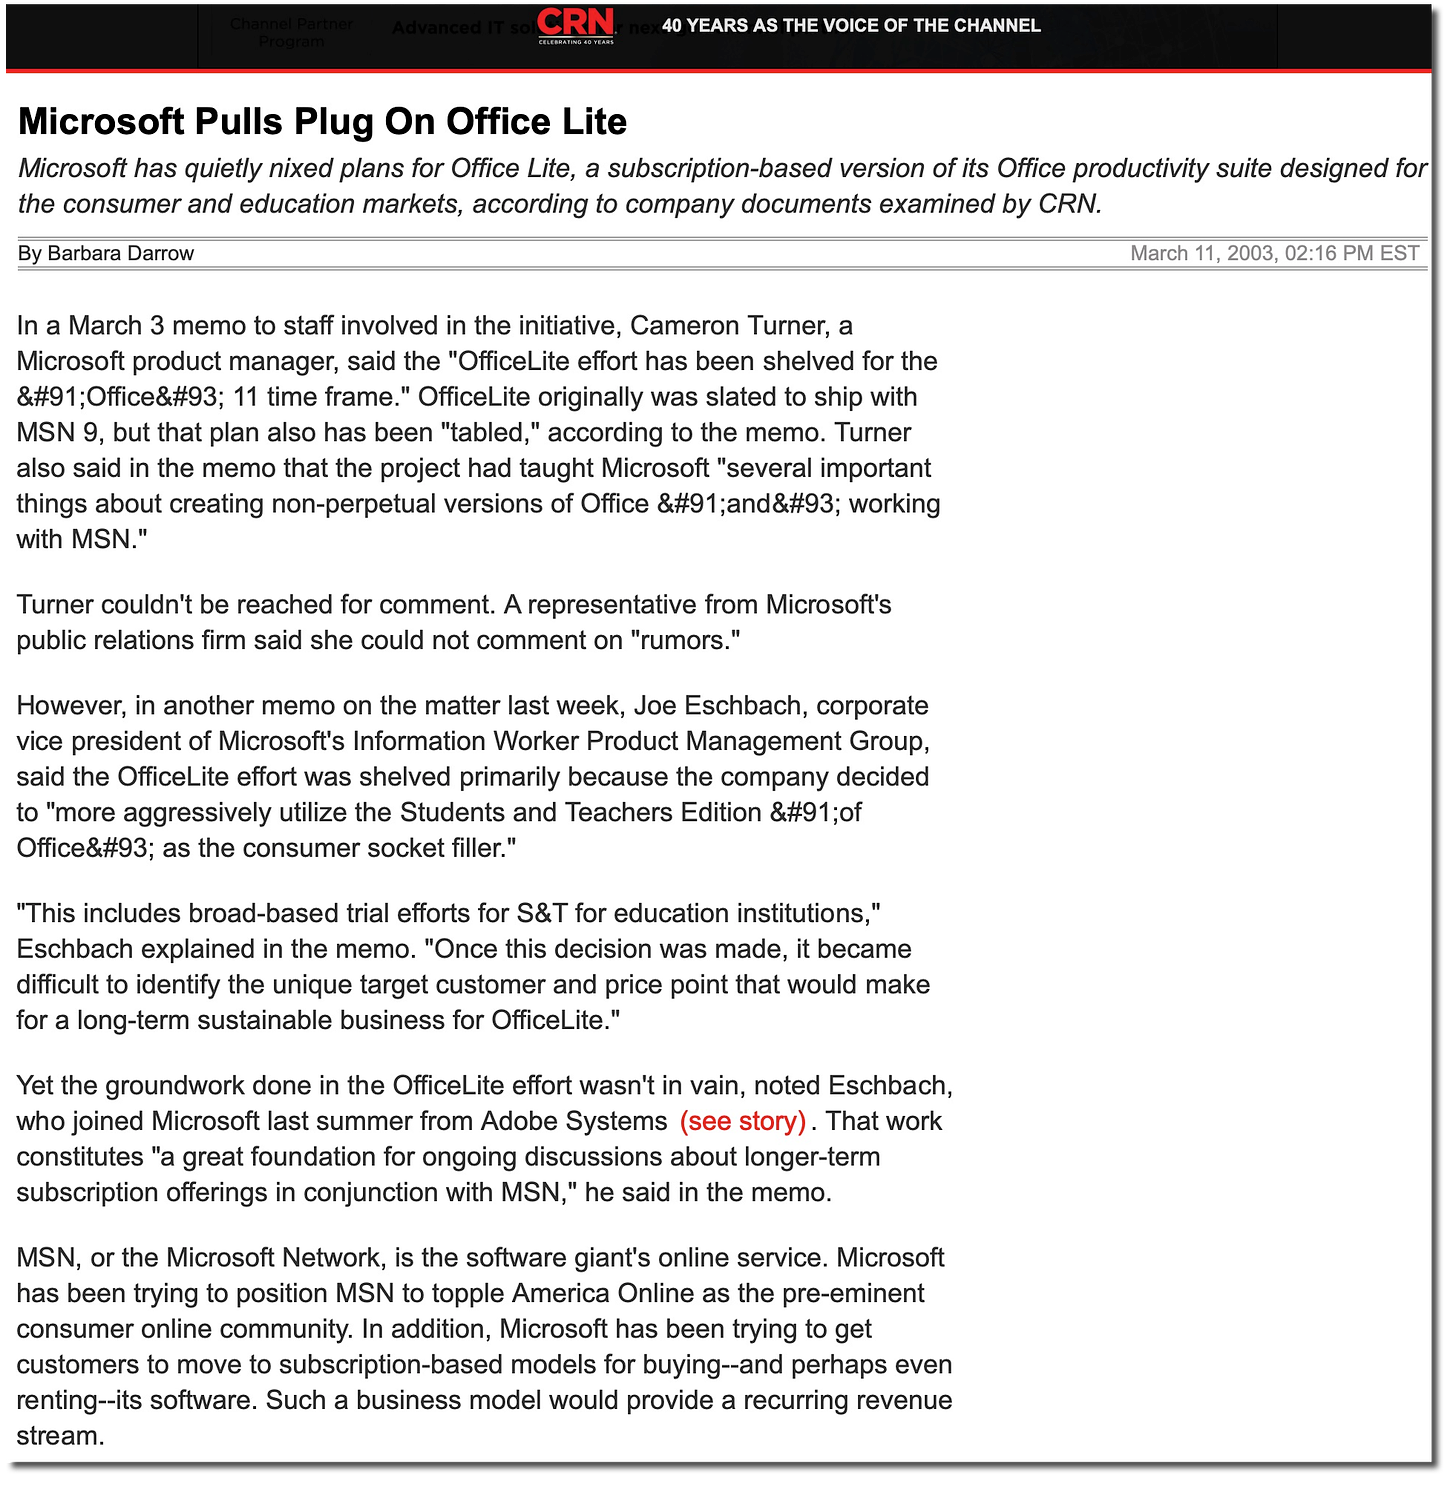 Microsoft Pulls Plug On Office Lite Microsoft has quietly nixed plans for Office Lite, a subscription-based version of its Office productivity suite designed for the consumer and education markets, according to company documents examined by CRN By Barbara Darrow March 11, 2003, 02:16 PM EST in Linkedin f Facebook Twitter % Copy Link Email - More In a March 3 memo to staff involved in the initiative, Cameron Turner, a Microsoft product manager, said the "OfficeLite effort has been shelved for the 8#91;Office&#93; 11 time frame." OfficeLite originally was slated to ship with MSN 9, but that plan also has been "tabled," according to the memo. Turner also said in the memo that the project had taught Microsoft "several important things about creating non-perpetual versions of Office &#91;and&#93; working with MSN. Turner couldn't be reached for comment. A representative from Microsoft's public relations firm said she could not comment on "rumors." However, in another memo on the matter last week, Joe Eschbach, corporate vice president of Microsoft's Information Worker Product Management Group, said the OfficeLite effort was shelved primarily because the company decided to "more aggressively utilize the Students and Teachers Edition &#91;0f Office&#93; as the consumer socket filler." "This includes broad-based trial efforts for S&T for education institutions, Eschbach explained in the memo. "Once this decision was made, it became difficult to identify the unique target customer and price point that would make for a long-term sustainable business for OfficeLite." Yet the groundwork done in the OfficeLite effort wasn't in vain, noted Eschbach, who joined Microsoft last summer from Adobe Systems (see story). That work constitutes "a great foundation for ongoing discussions about longer-term subscription offerings in conjunction with MSN," he said in the memo. MSN, or the Microsoft Network, is the software giant's online service. Microsoft has been trying to position MSN to topple America Online as the pre-eminent consumer online community. In addition, Microsoft has been trying to get customers to move to subscription-based models for buying--and perhaps even renting--its software. Such a business model would provide a recurring revenue stream.